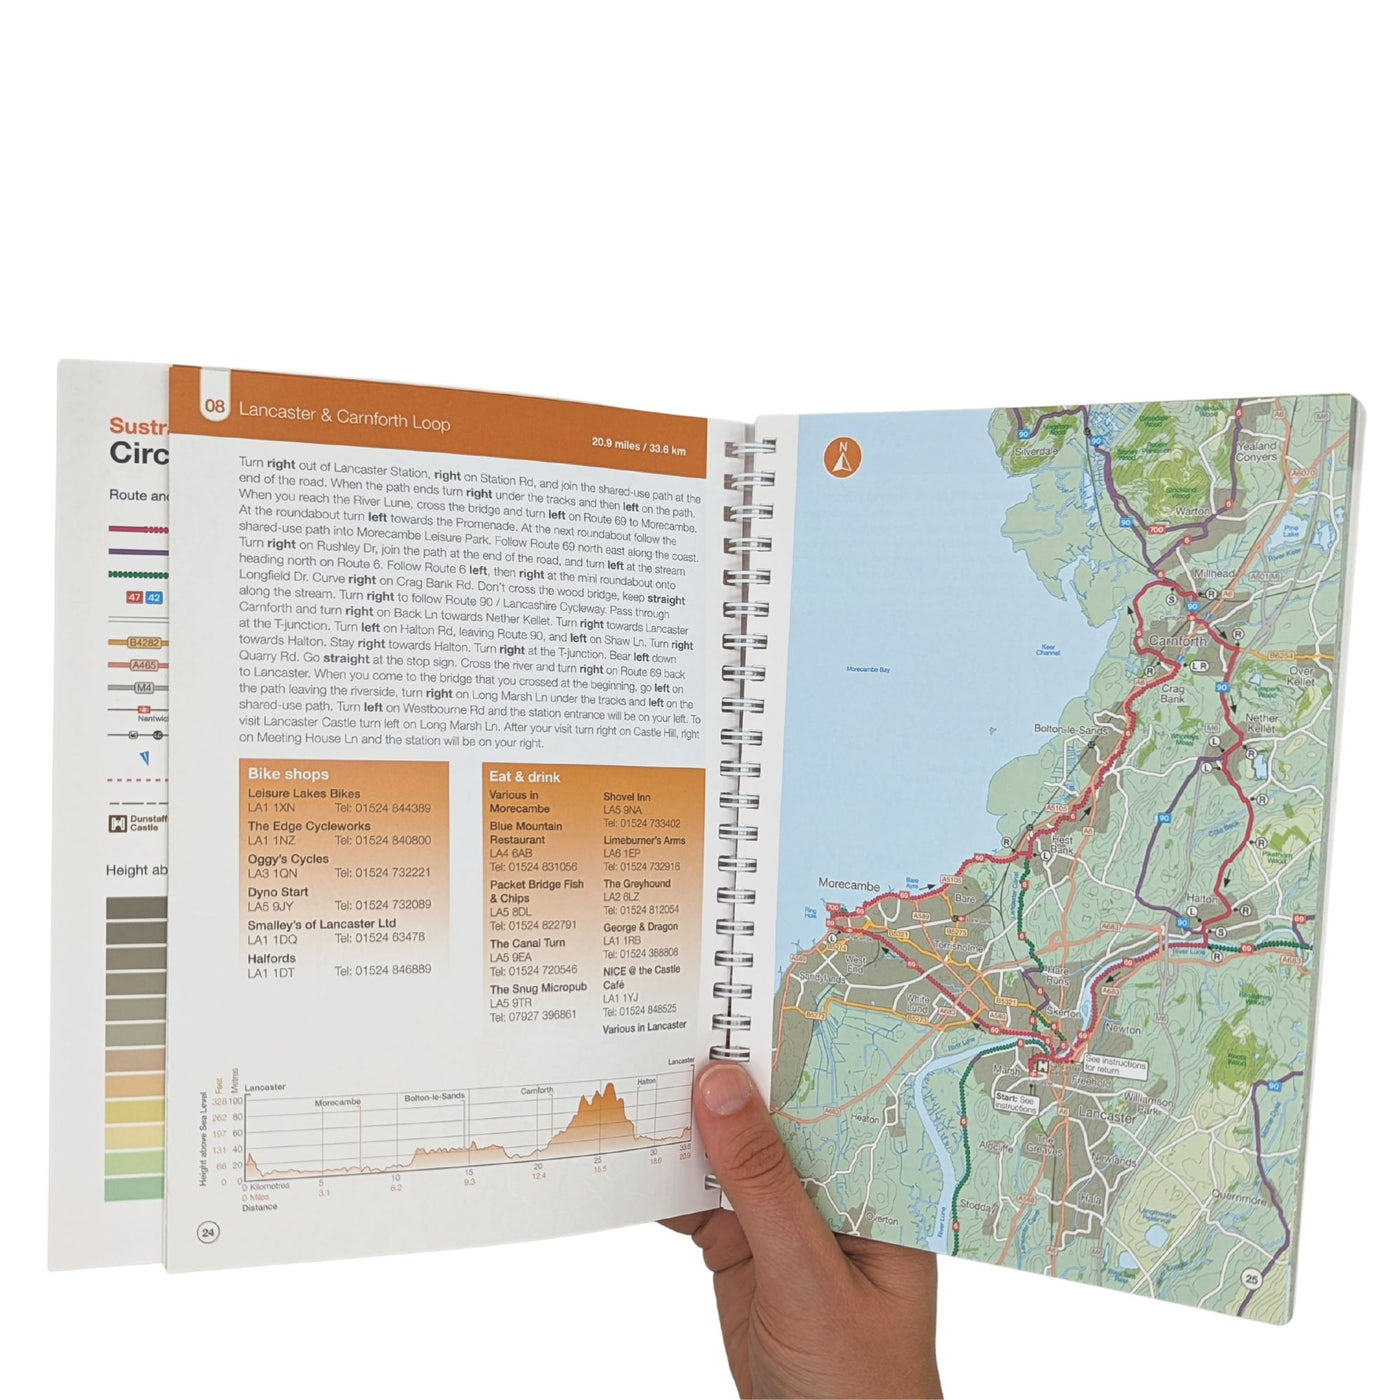 Guidebook open showing full-page map